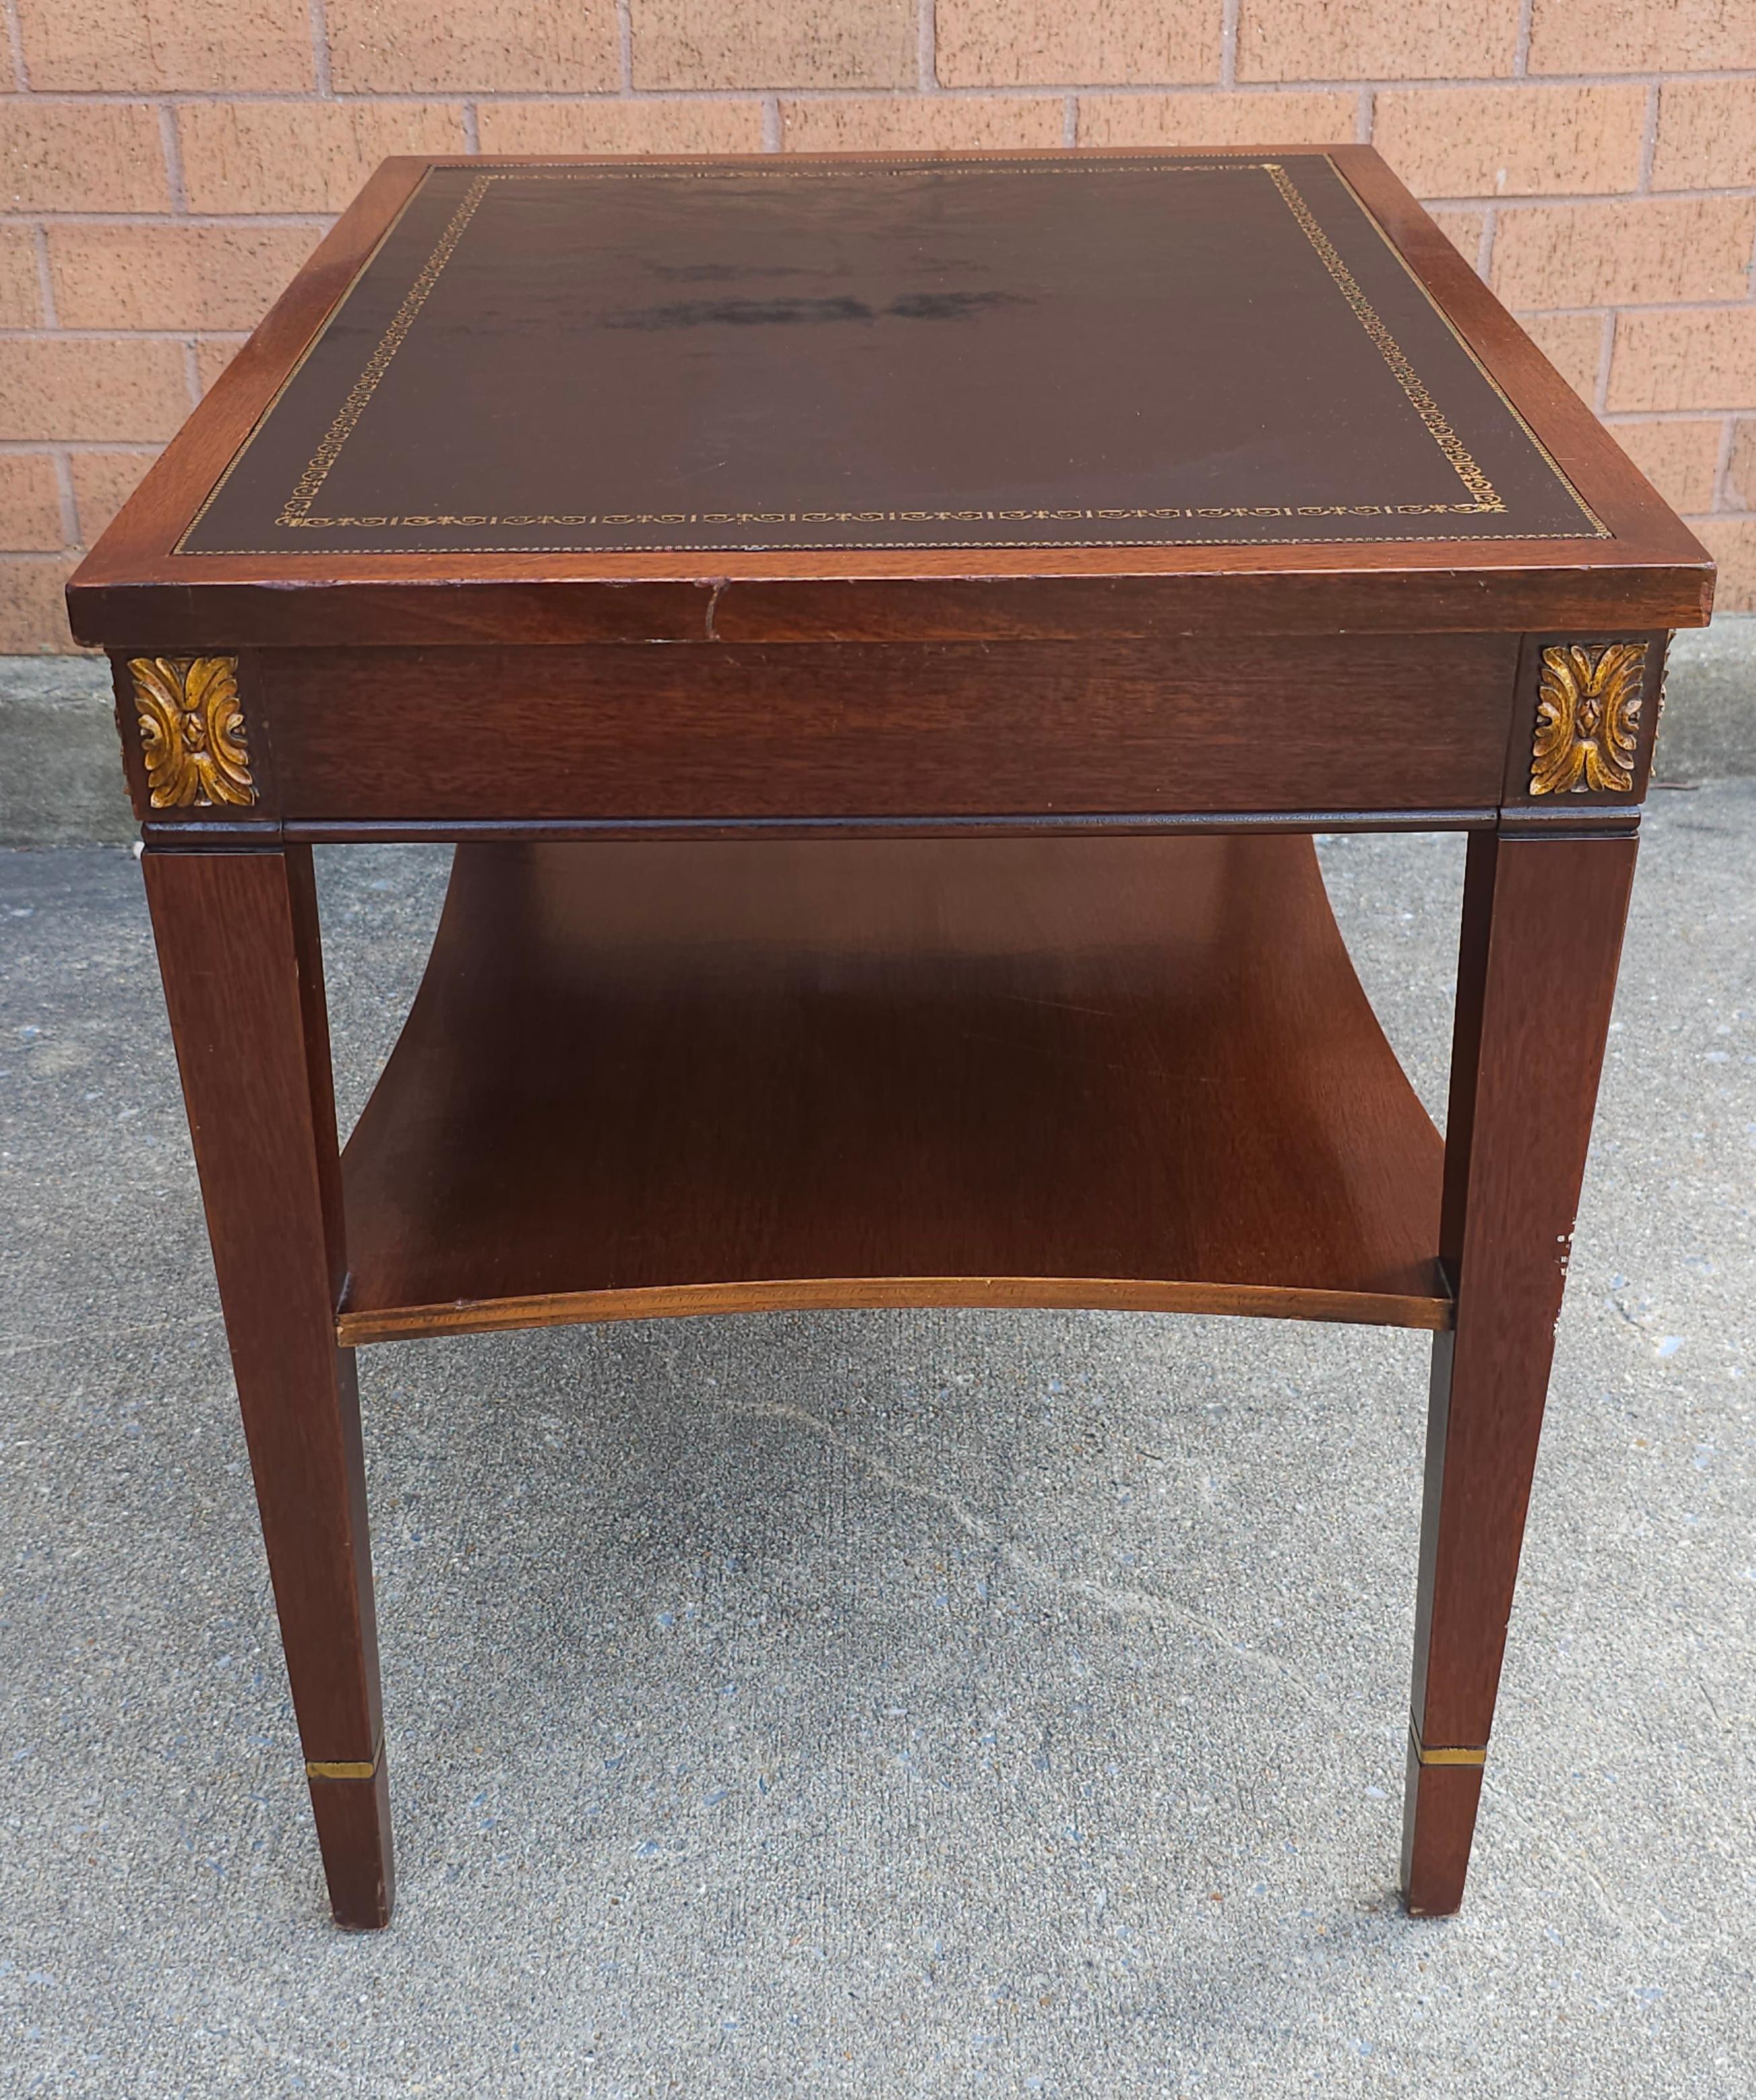 A Brandt Furniture Partial Gilt And Black Tooled Leather with gold stenciling Mahogany two Tiered Side Table
Measures 19.5